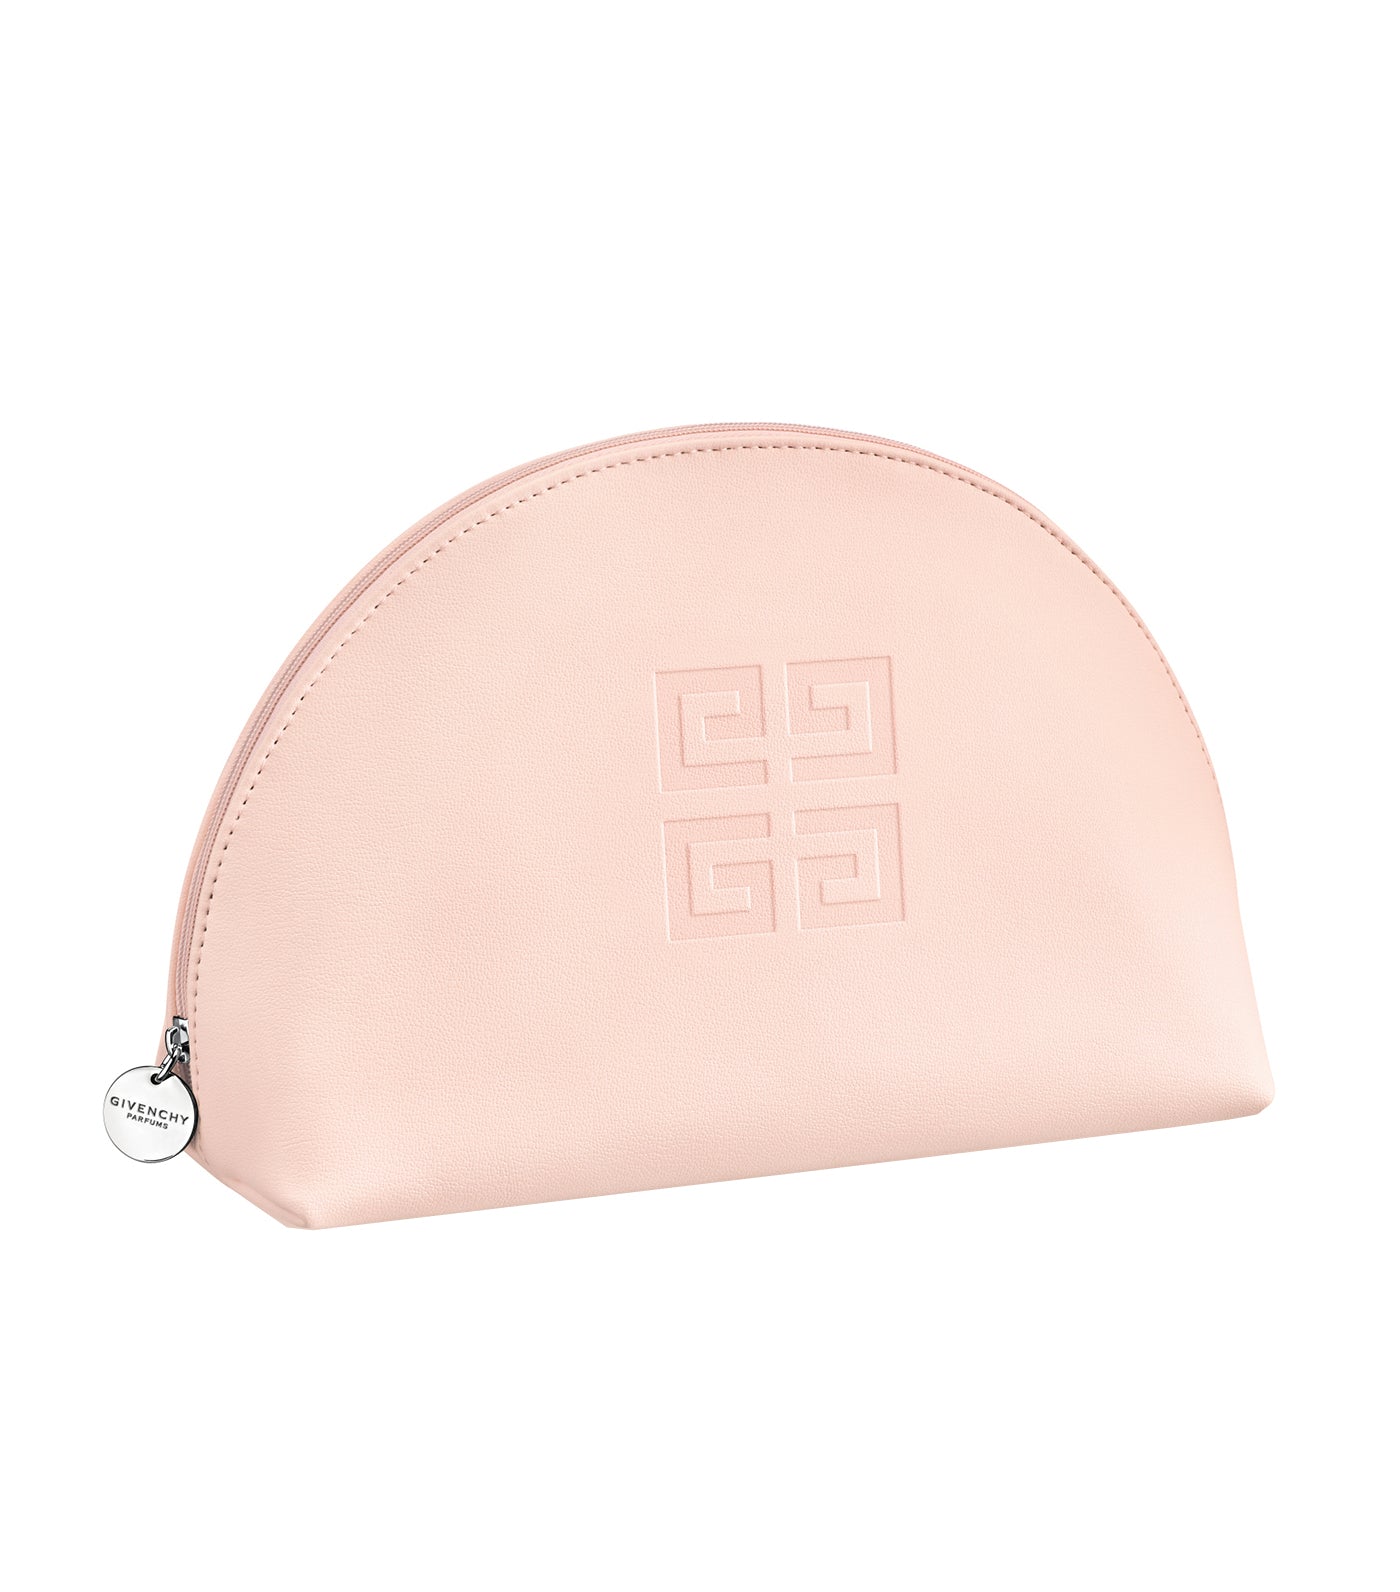 Nude Pink Half Moon Makeup Pouch